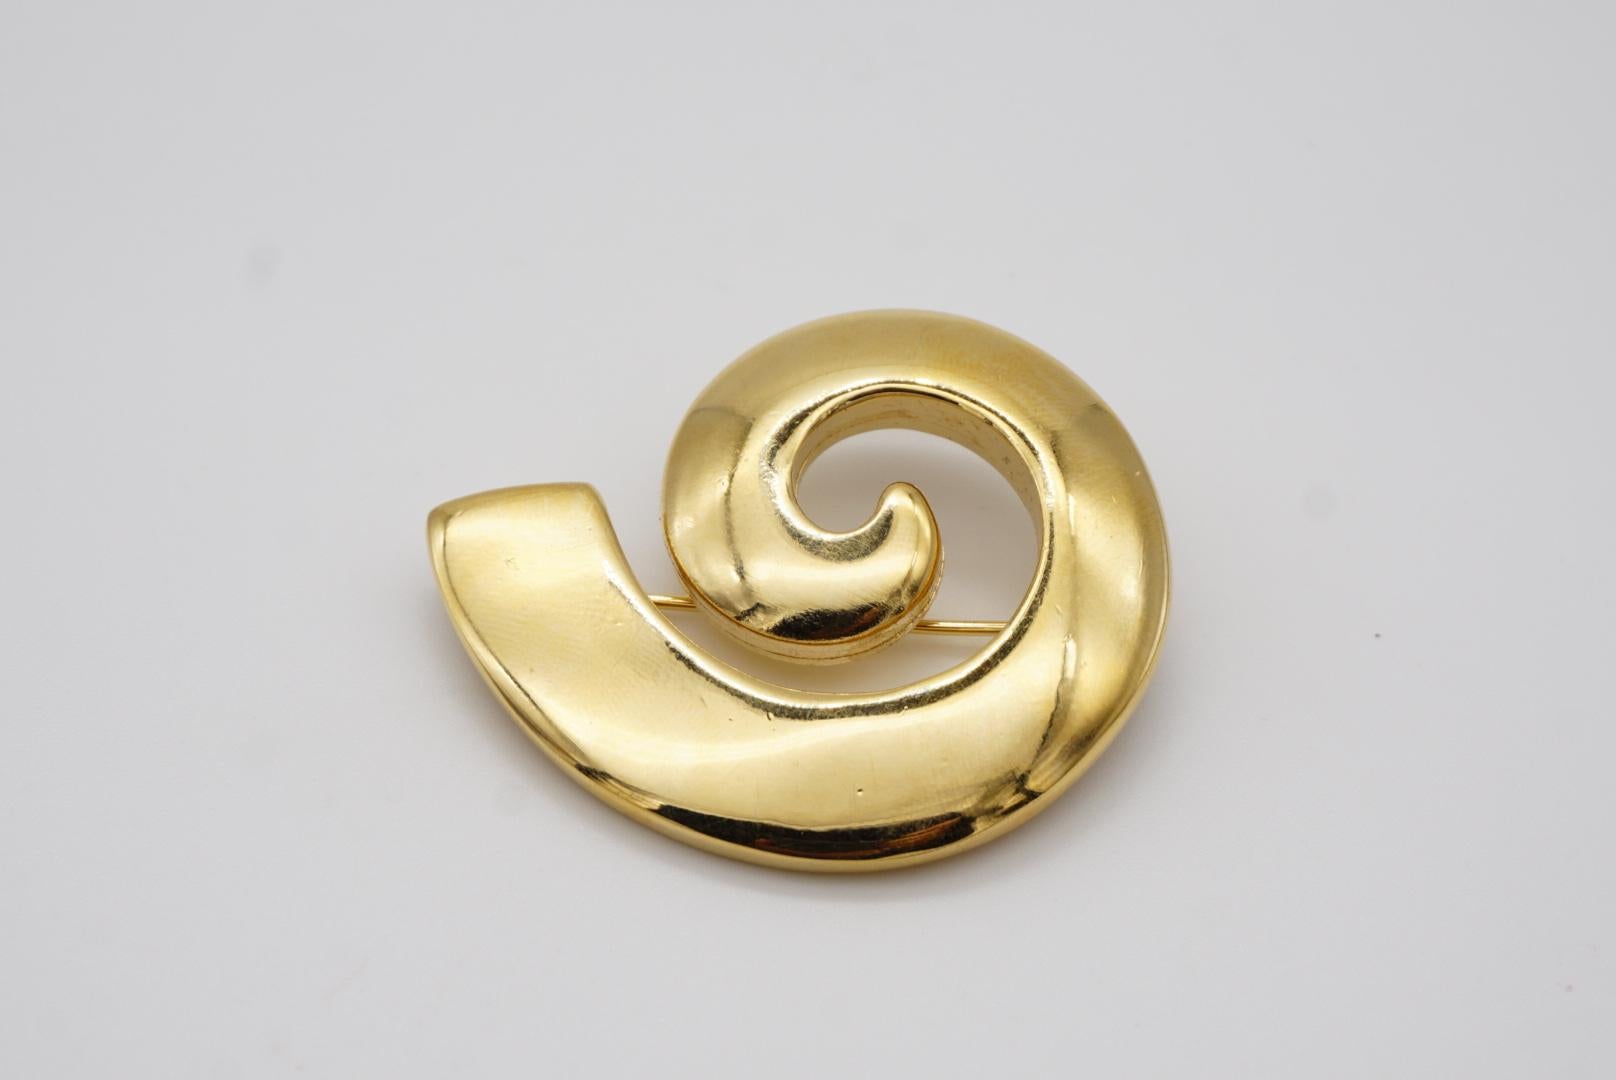 Givenchy Vintage 1980s Large Glow Swirl Sculpted Abstract Modernist Gold Brooch For Sale 1